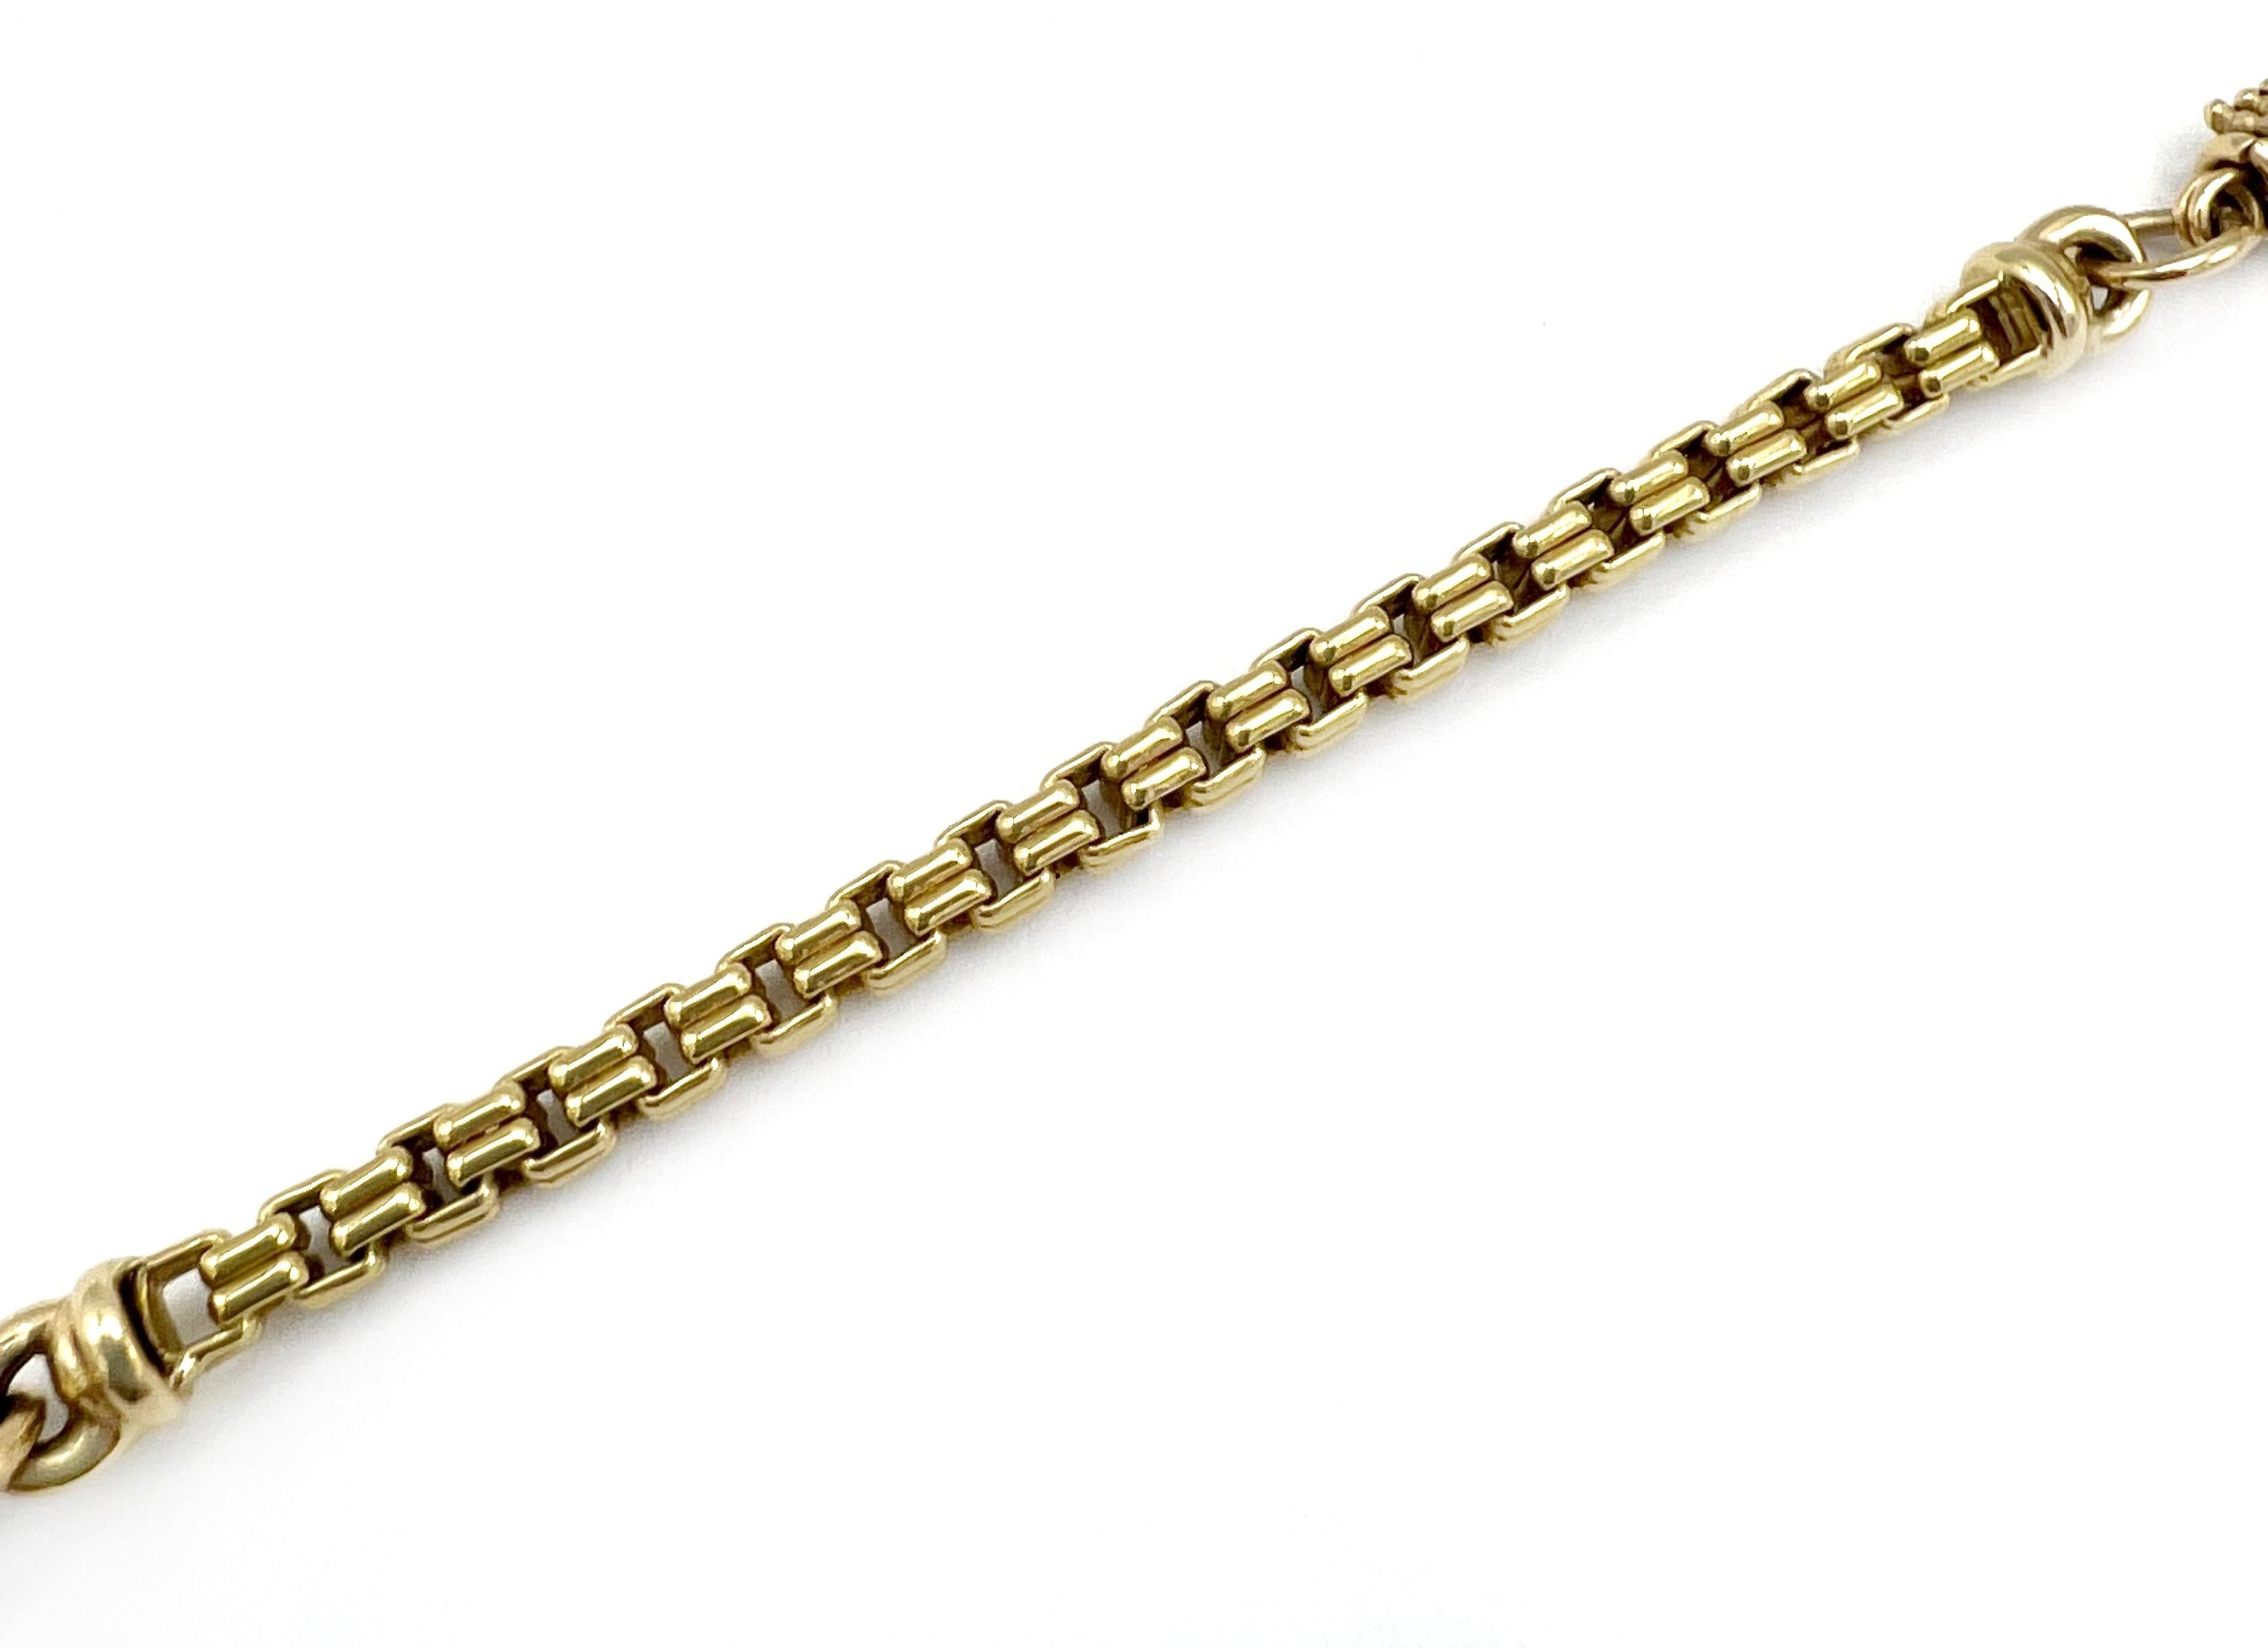 A Michael Dawkins 14k gold chain necklace, with two rows box link and barrel shaped granulated parts.​

​It’s a modern chain necklace with a vintage vibe that is reached by using gold with a nice aged hue. The great craftsmanship, similar to the